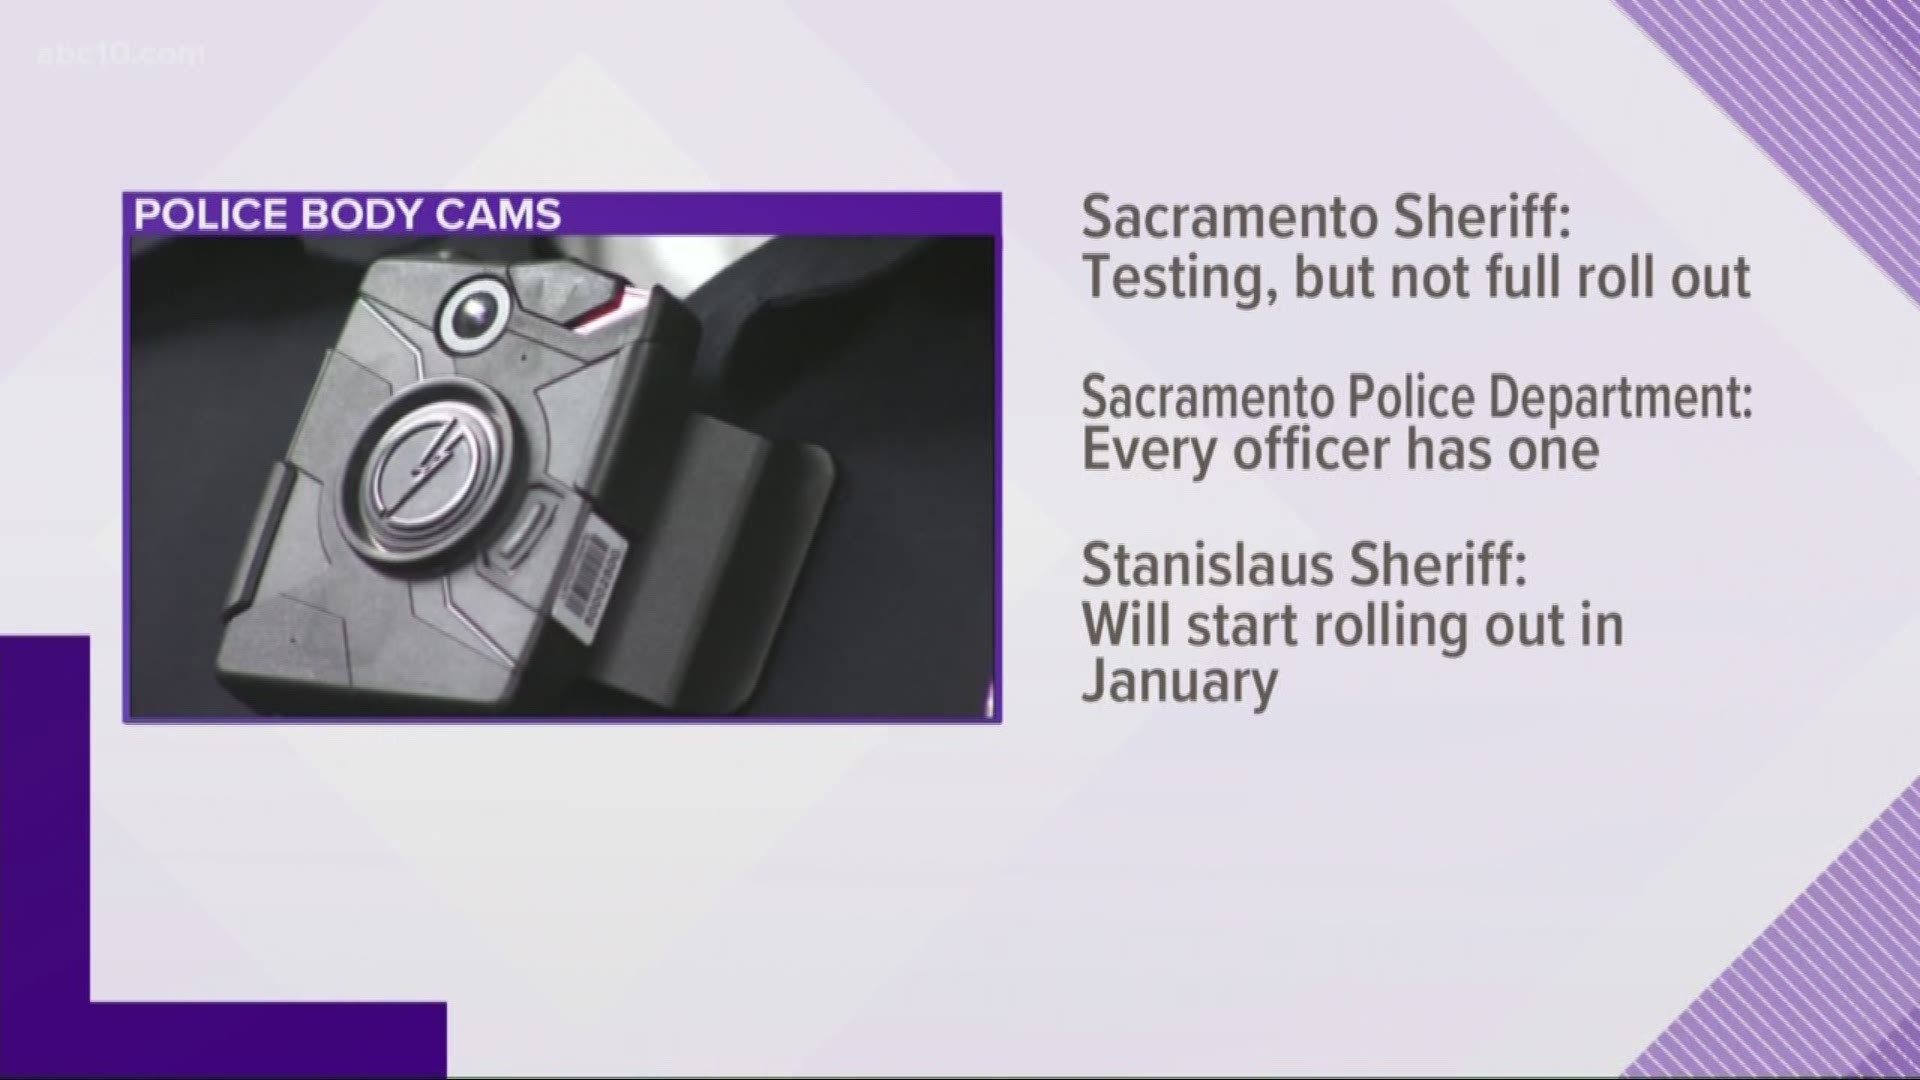 Body cameras are still being tested by the Sacramento County Sheriff's Department.